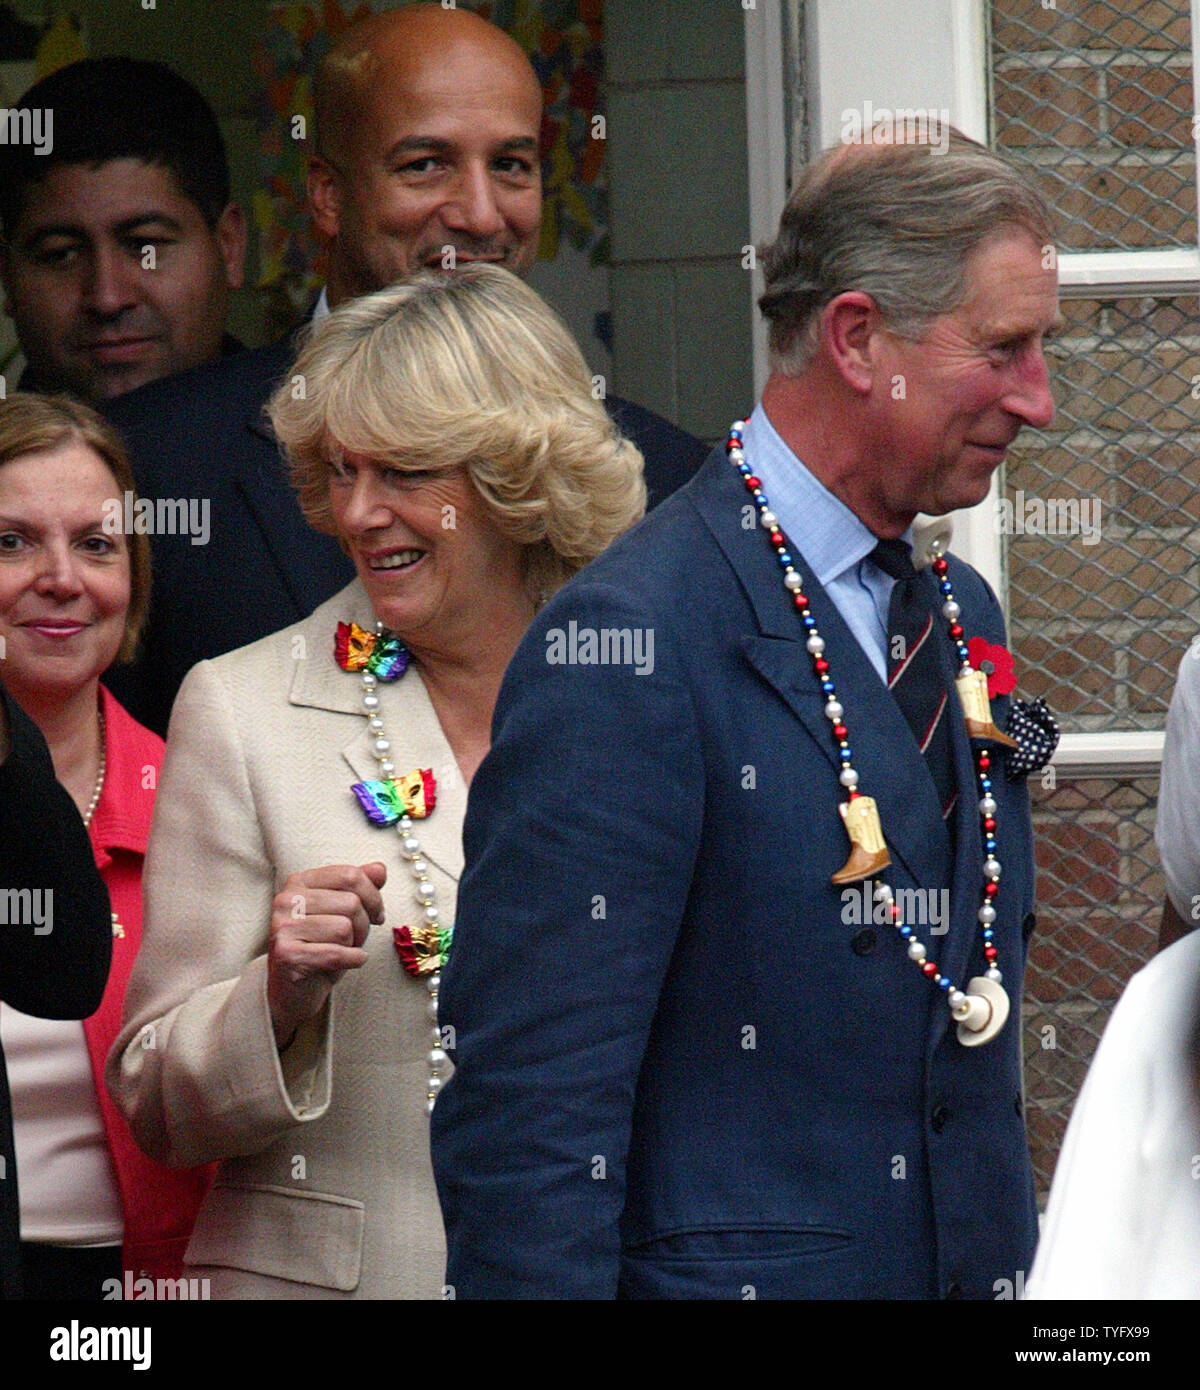 Britain's Prince Charles and his wife Camilla, Duchess of Cornwall, wearing Mardi Gras beads, visits Cathedral Academy in New Orleans' French Quarter Friday, November 4, 2005. Behind the duchess is New Orleans Mayor Ray Nagin. The Prince toured a neighborhood flooded by Hurricane Katrina and stopped by the small Catholic school, many of whose students transferred from other schools damaged in the flood. (UPI Photo/A.J. Sisco) Stock Photo